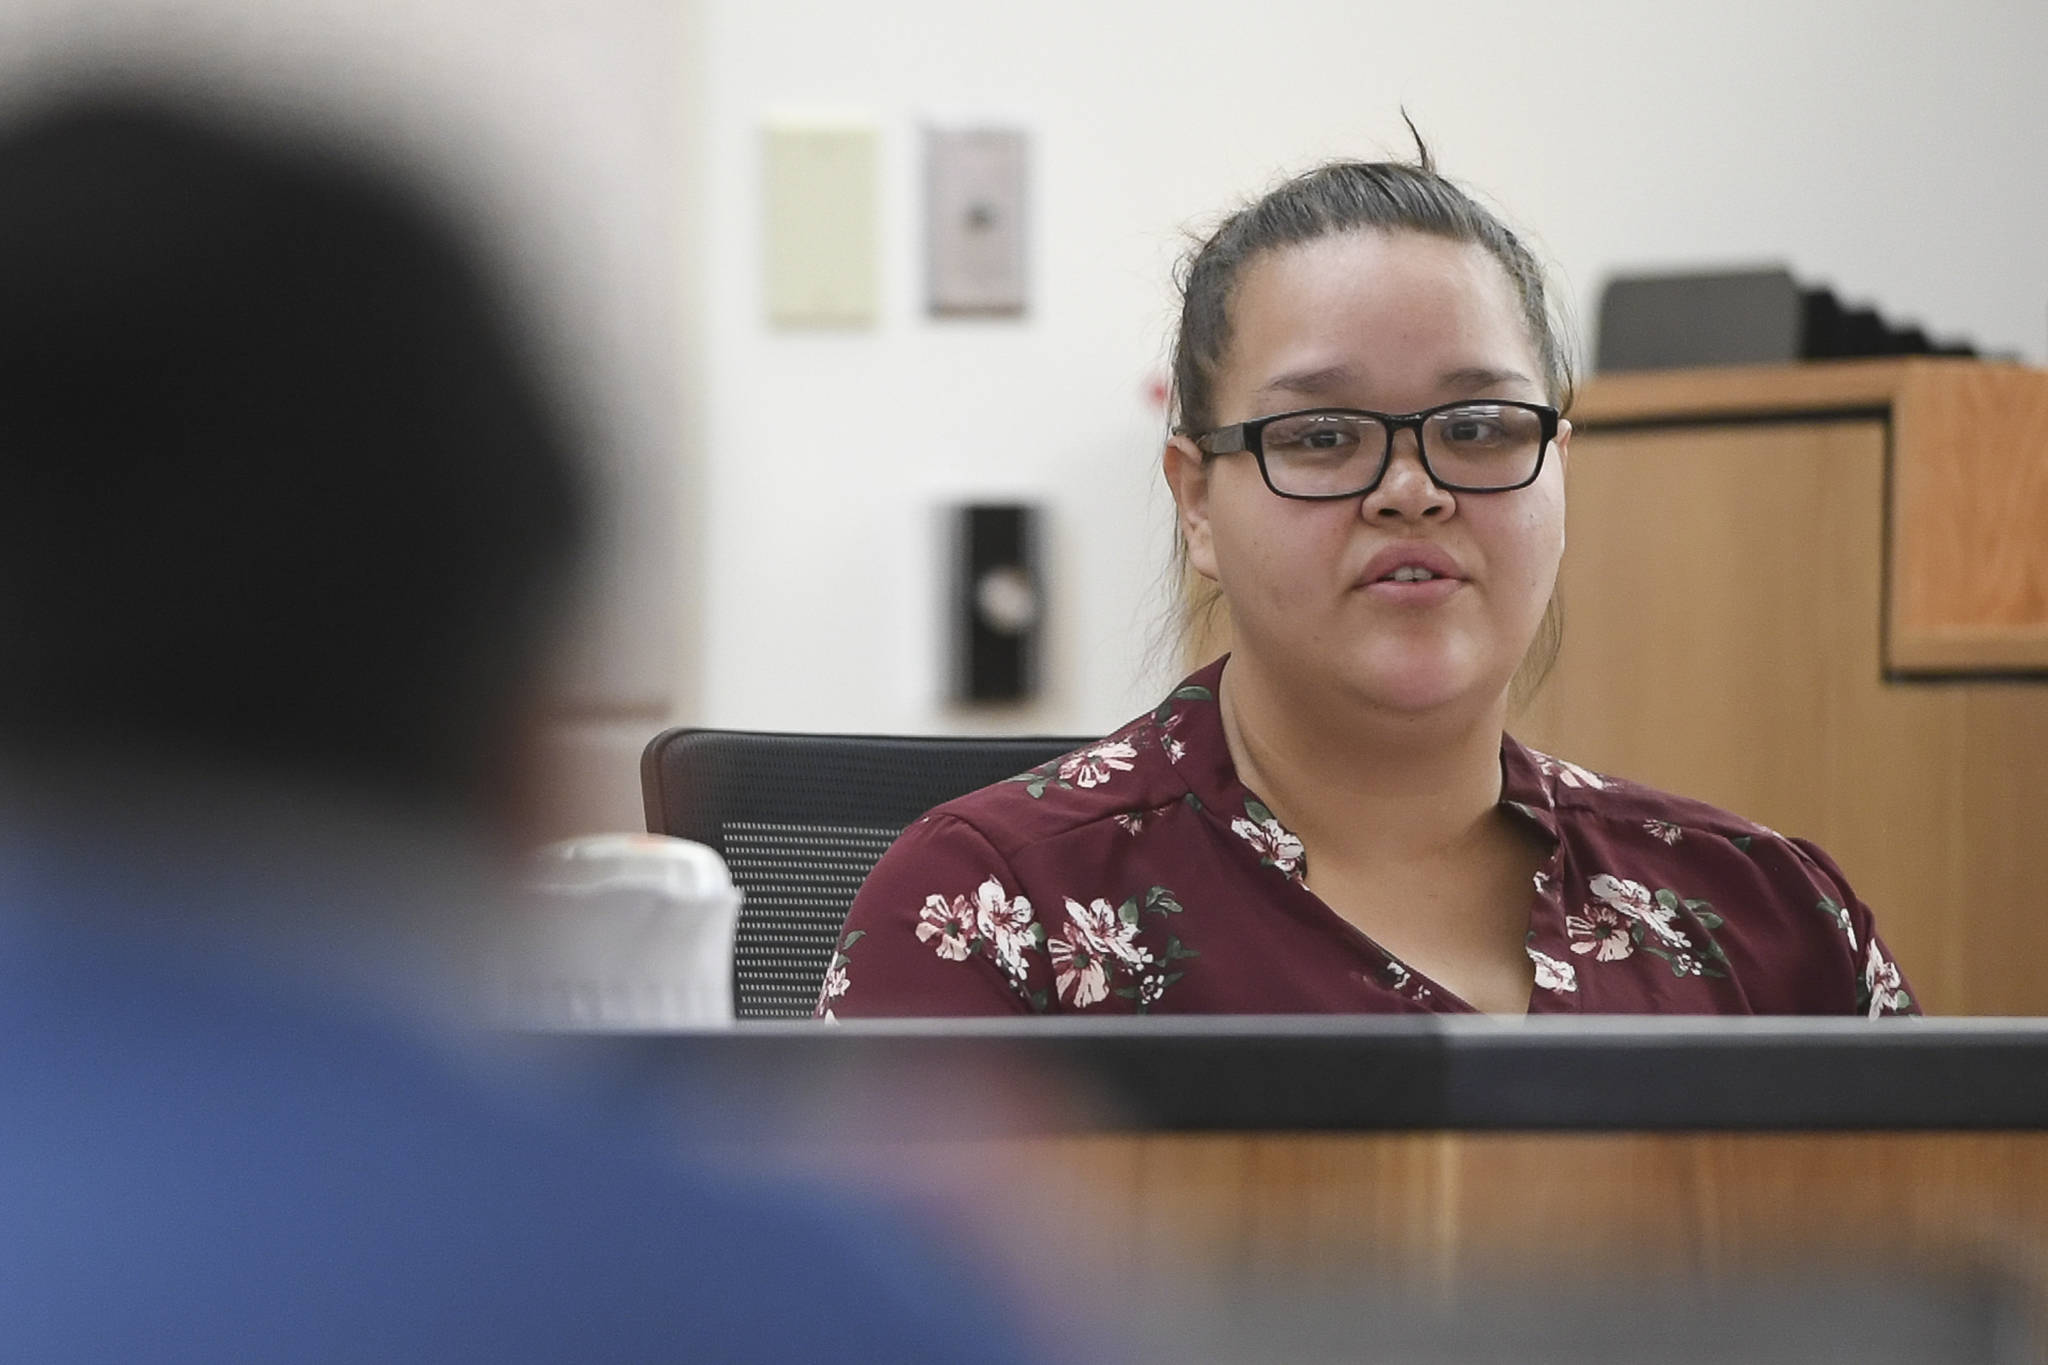 Lorissa Evenson, a former girlfriend of Laron Carlton Graham, answers questions on the witness stand from defense attorney Natasha Norris in Juneau Superior Court on Tuesday, Sept. 24, 2019, during Graham’s trial. Graham is facing two counts of first-degree murder for the November 2015 shooting deaths of 36-year-old Robert H. Meireis and 34-year-old Elizabeth K. Tonsmeire. (Michael Penn | Juneau Empire)